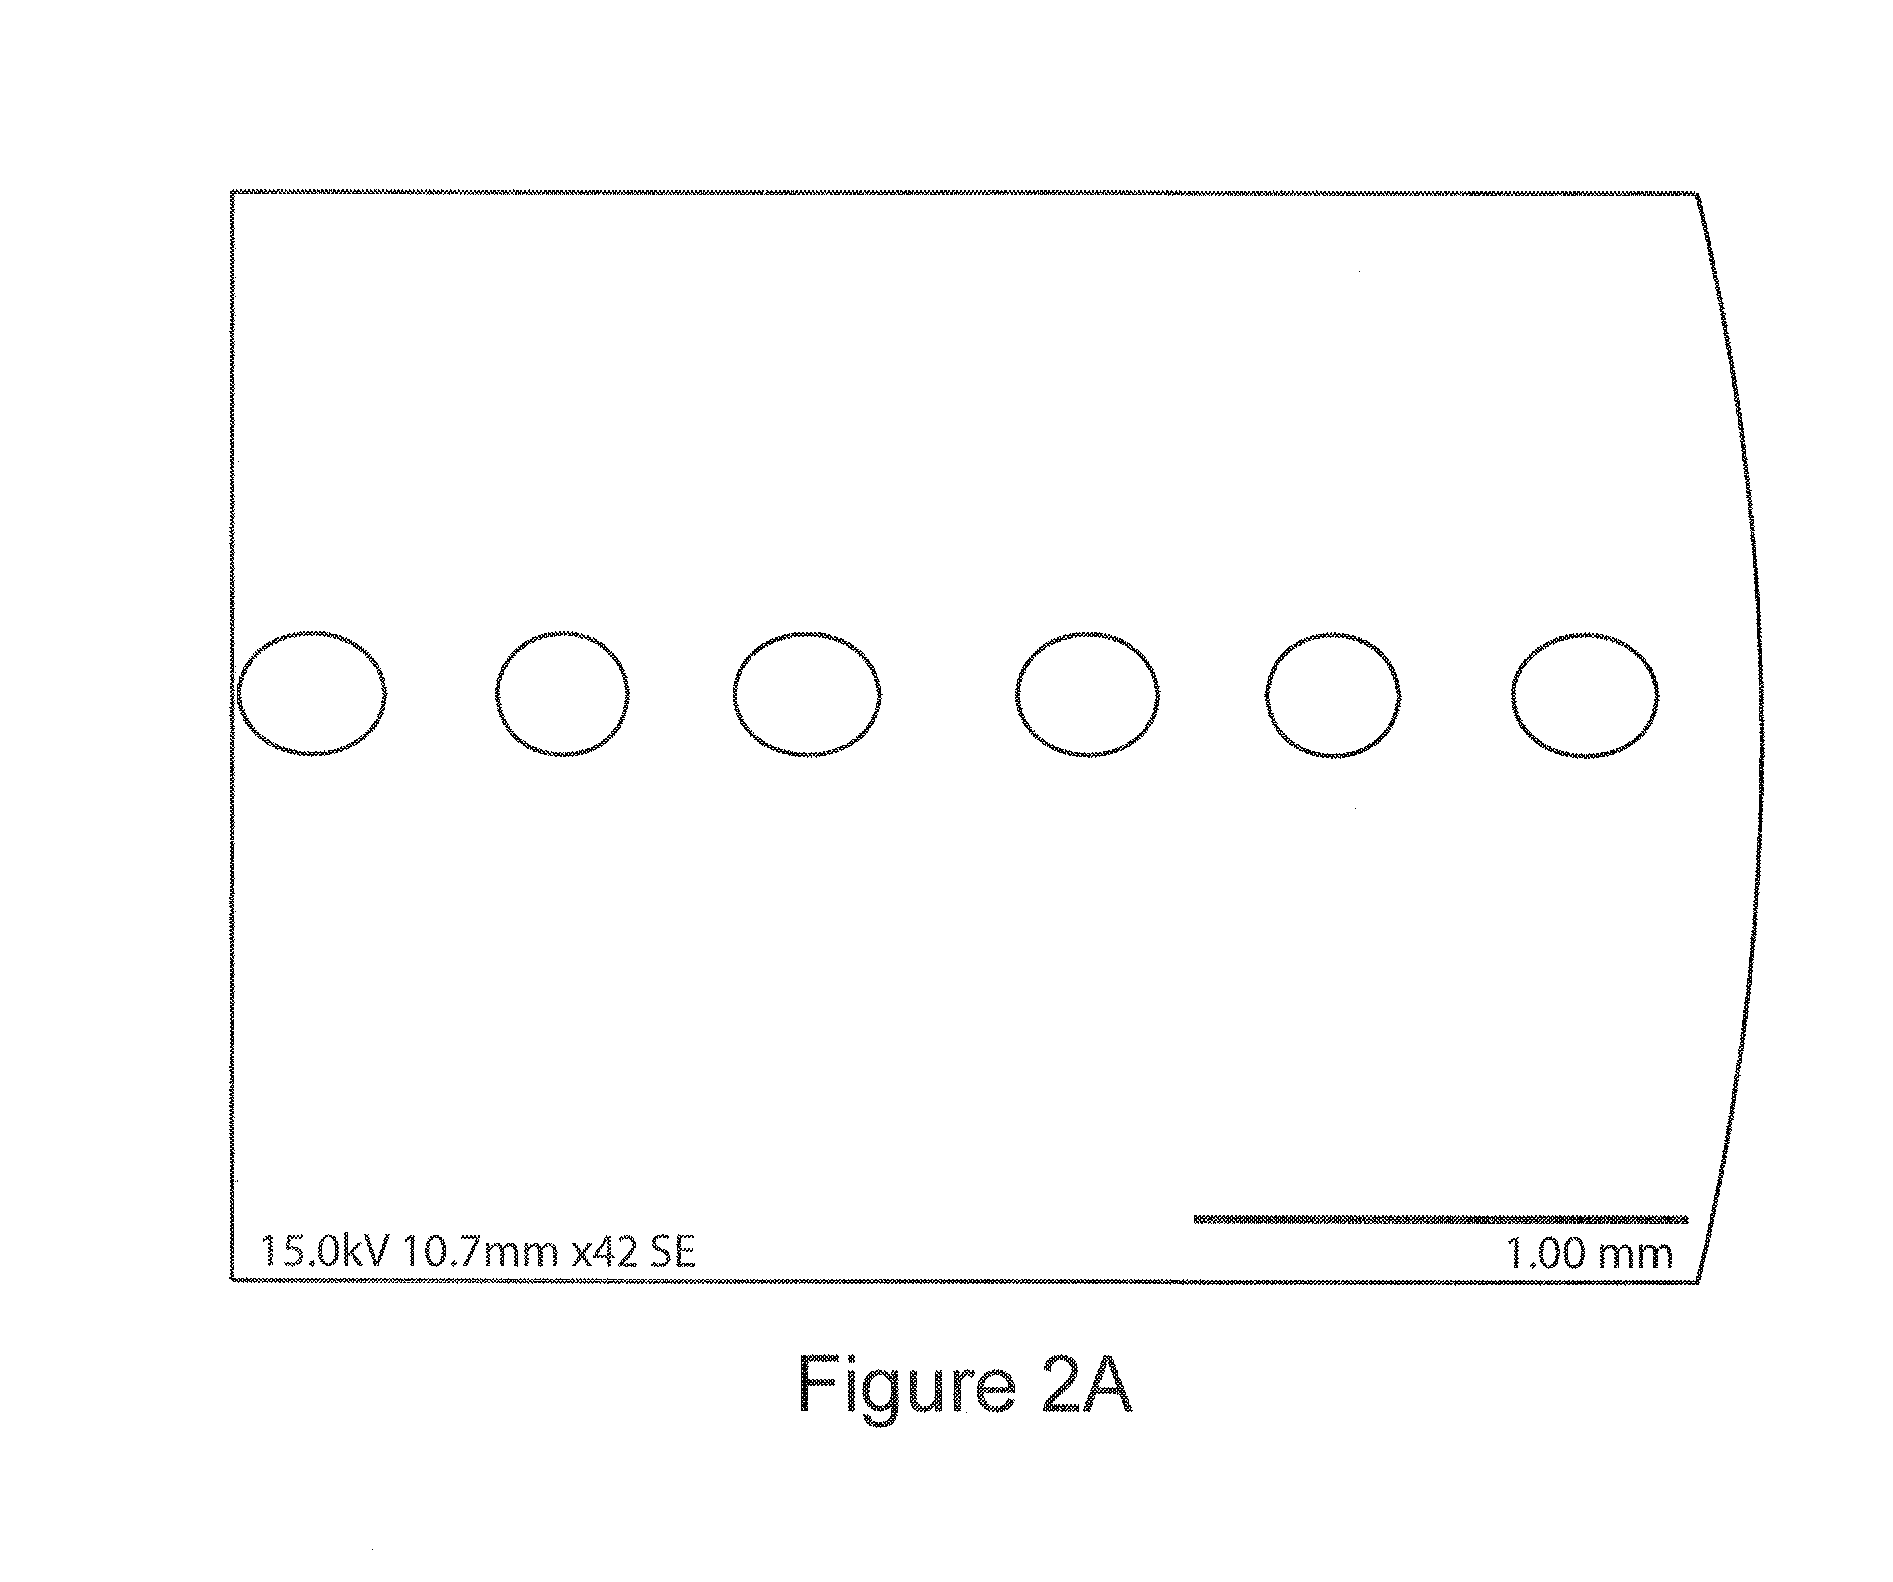 Biomedical implantable material and methods of producing the same